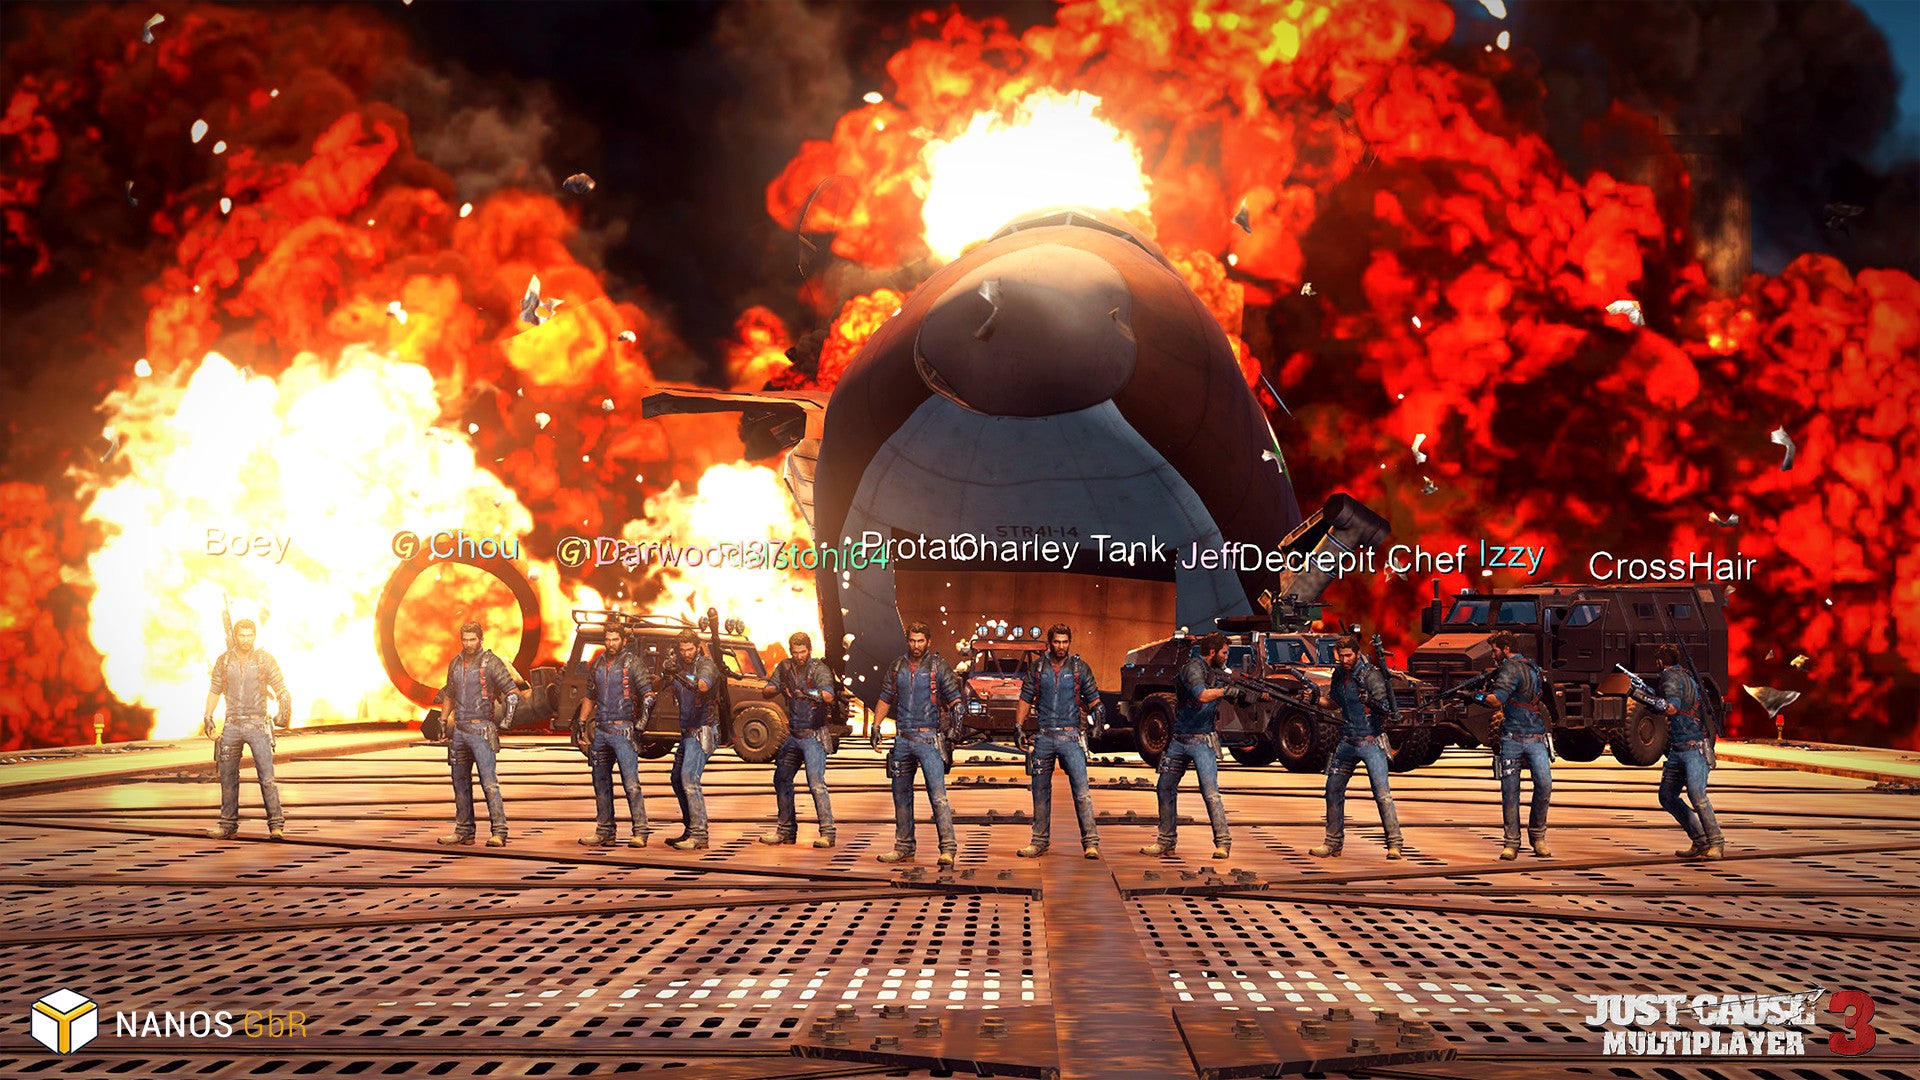 The Just Cause multiplayer mod will finally out July 20 | VG247